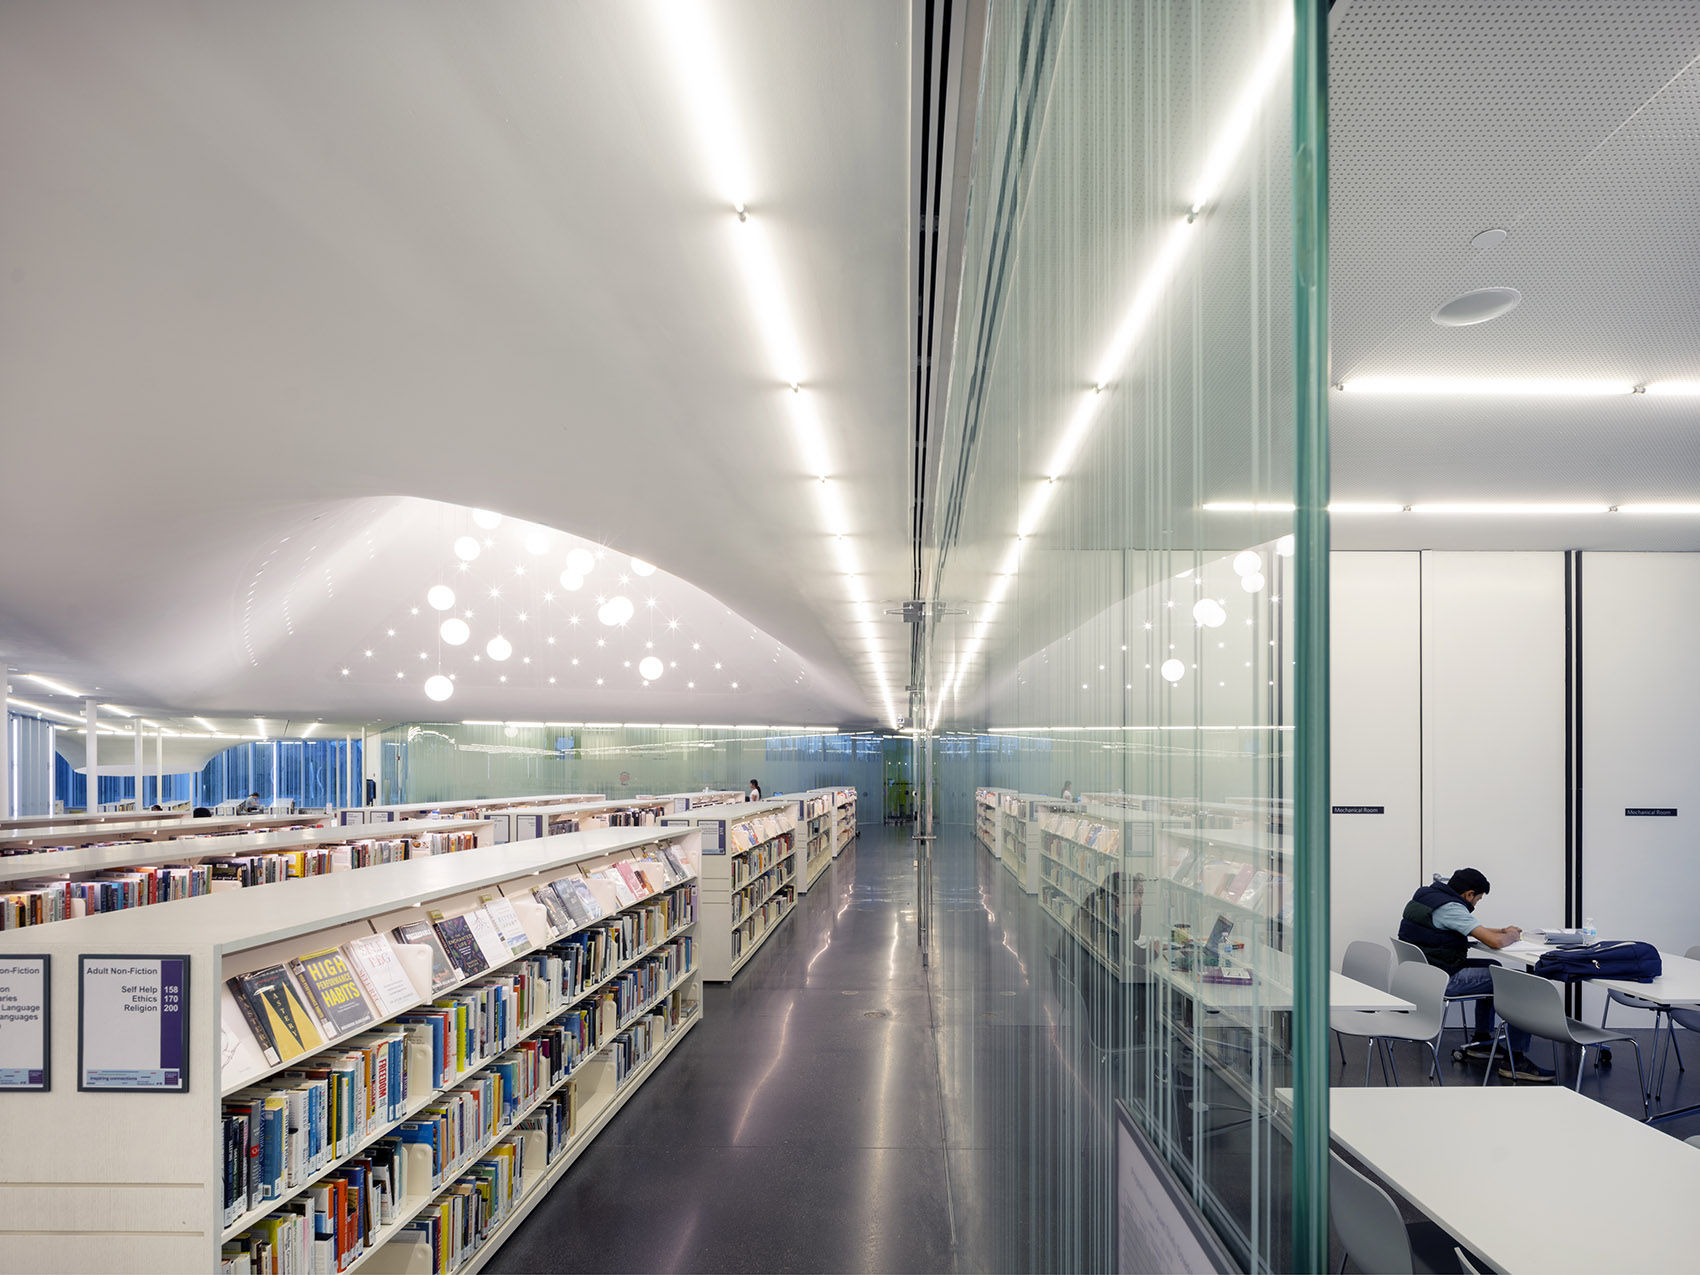 The design of the library area of Springdale Library